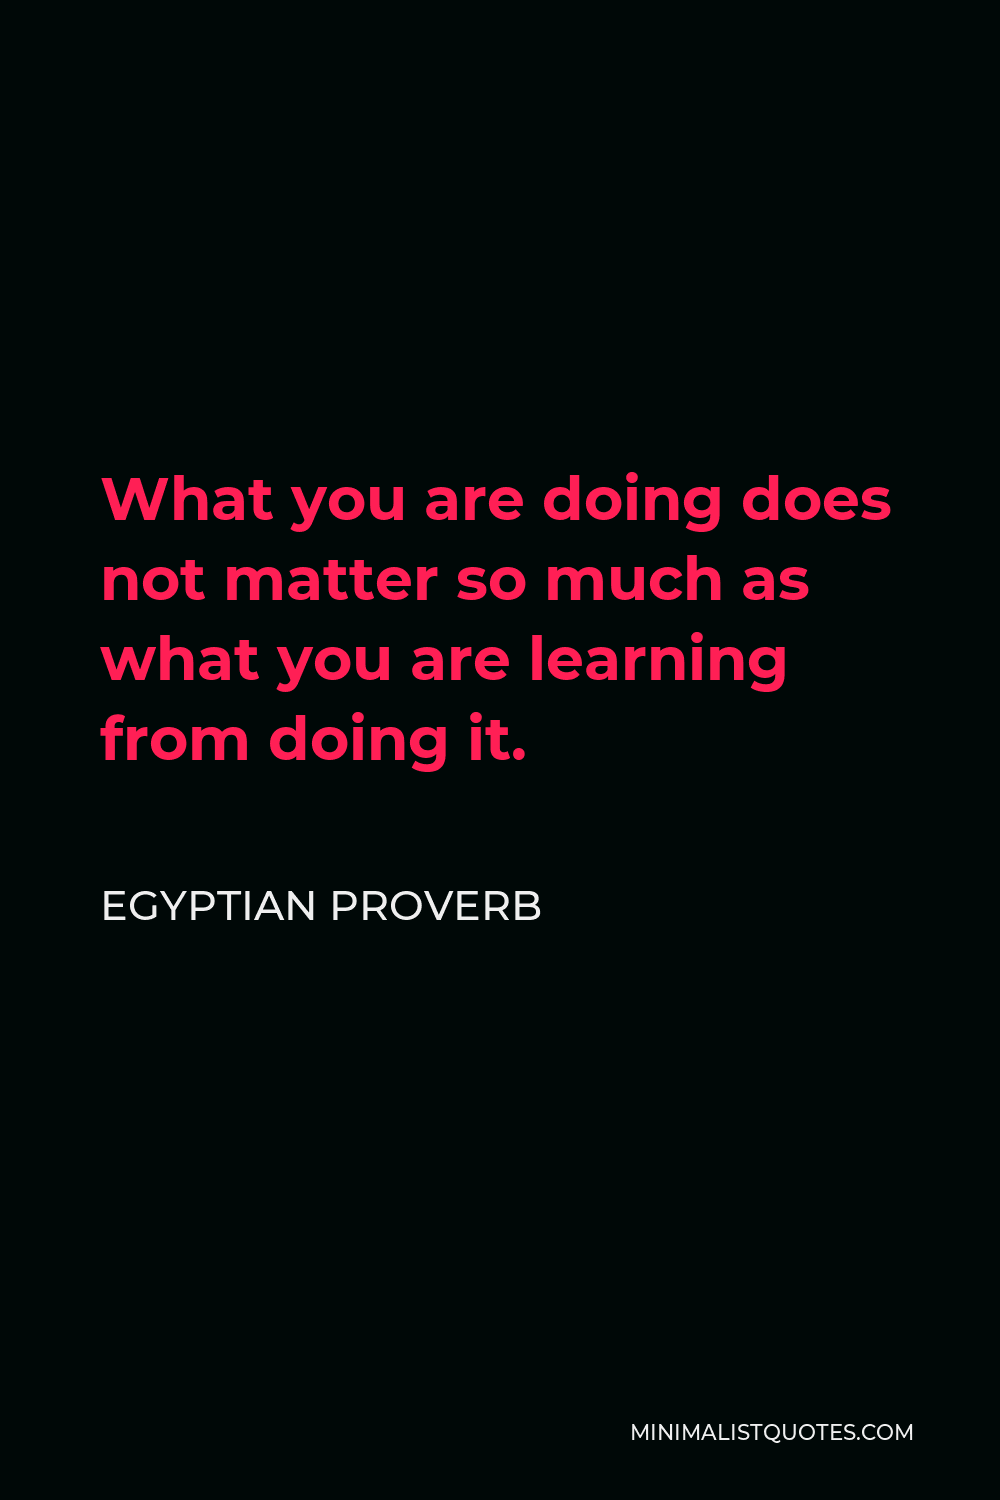 Egyptian Proverb Quote - What you are doing does not matter so much as what you are learning from doing it.